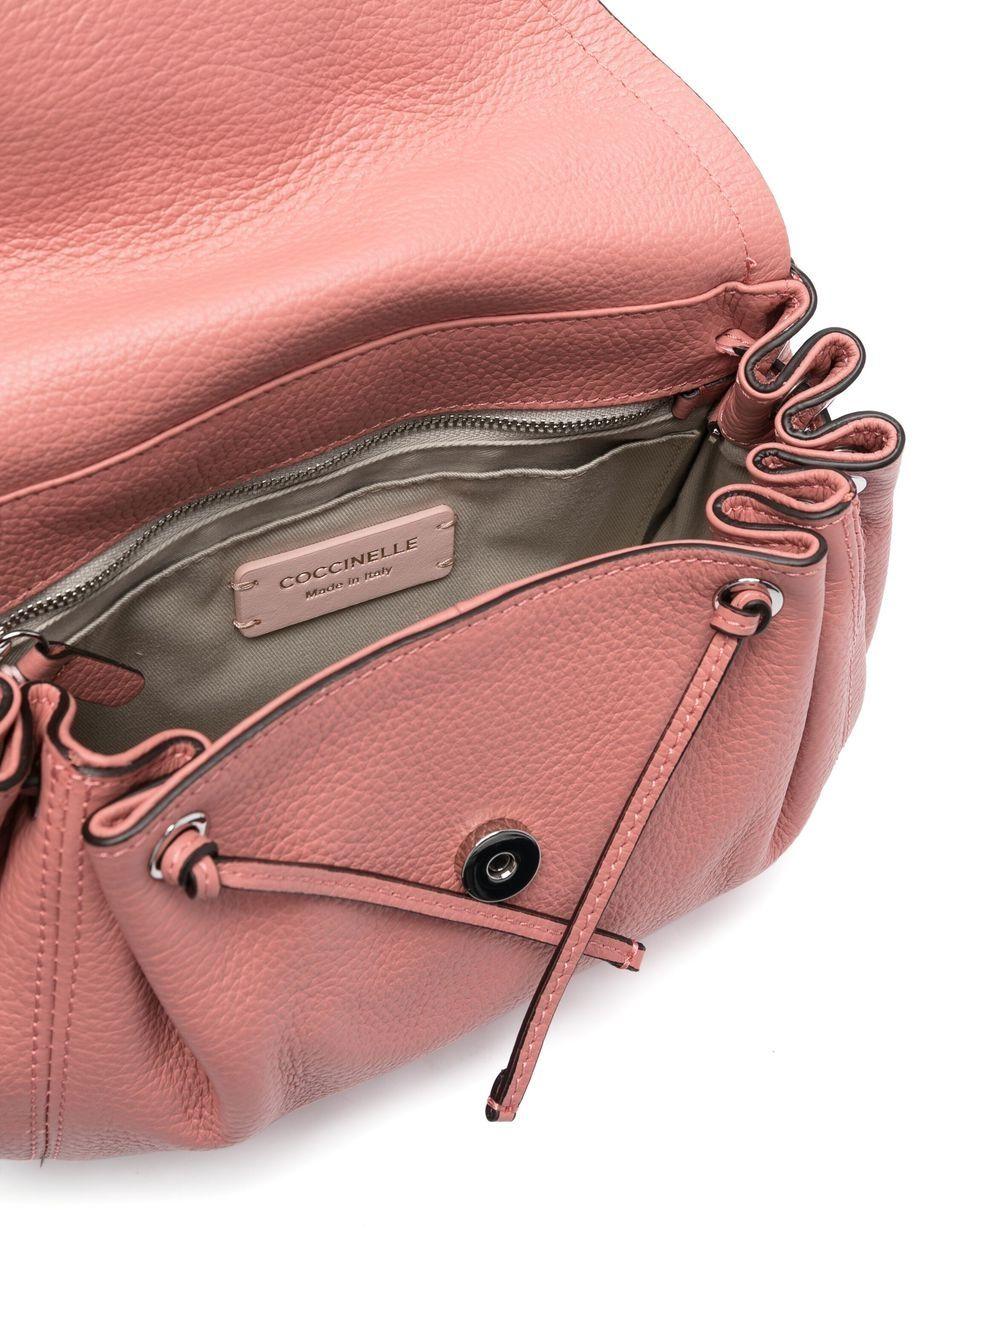 Coccinelle Buckle-detail Leather Crossbody Bag in Pink | Lyst